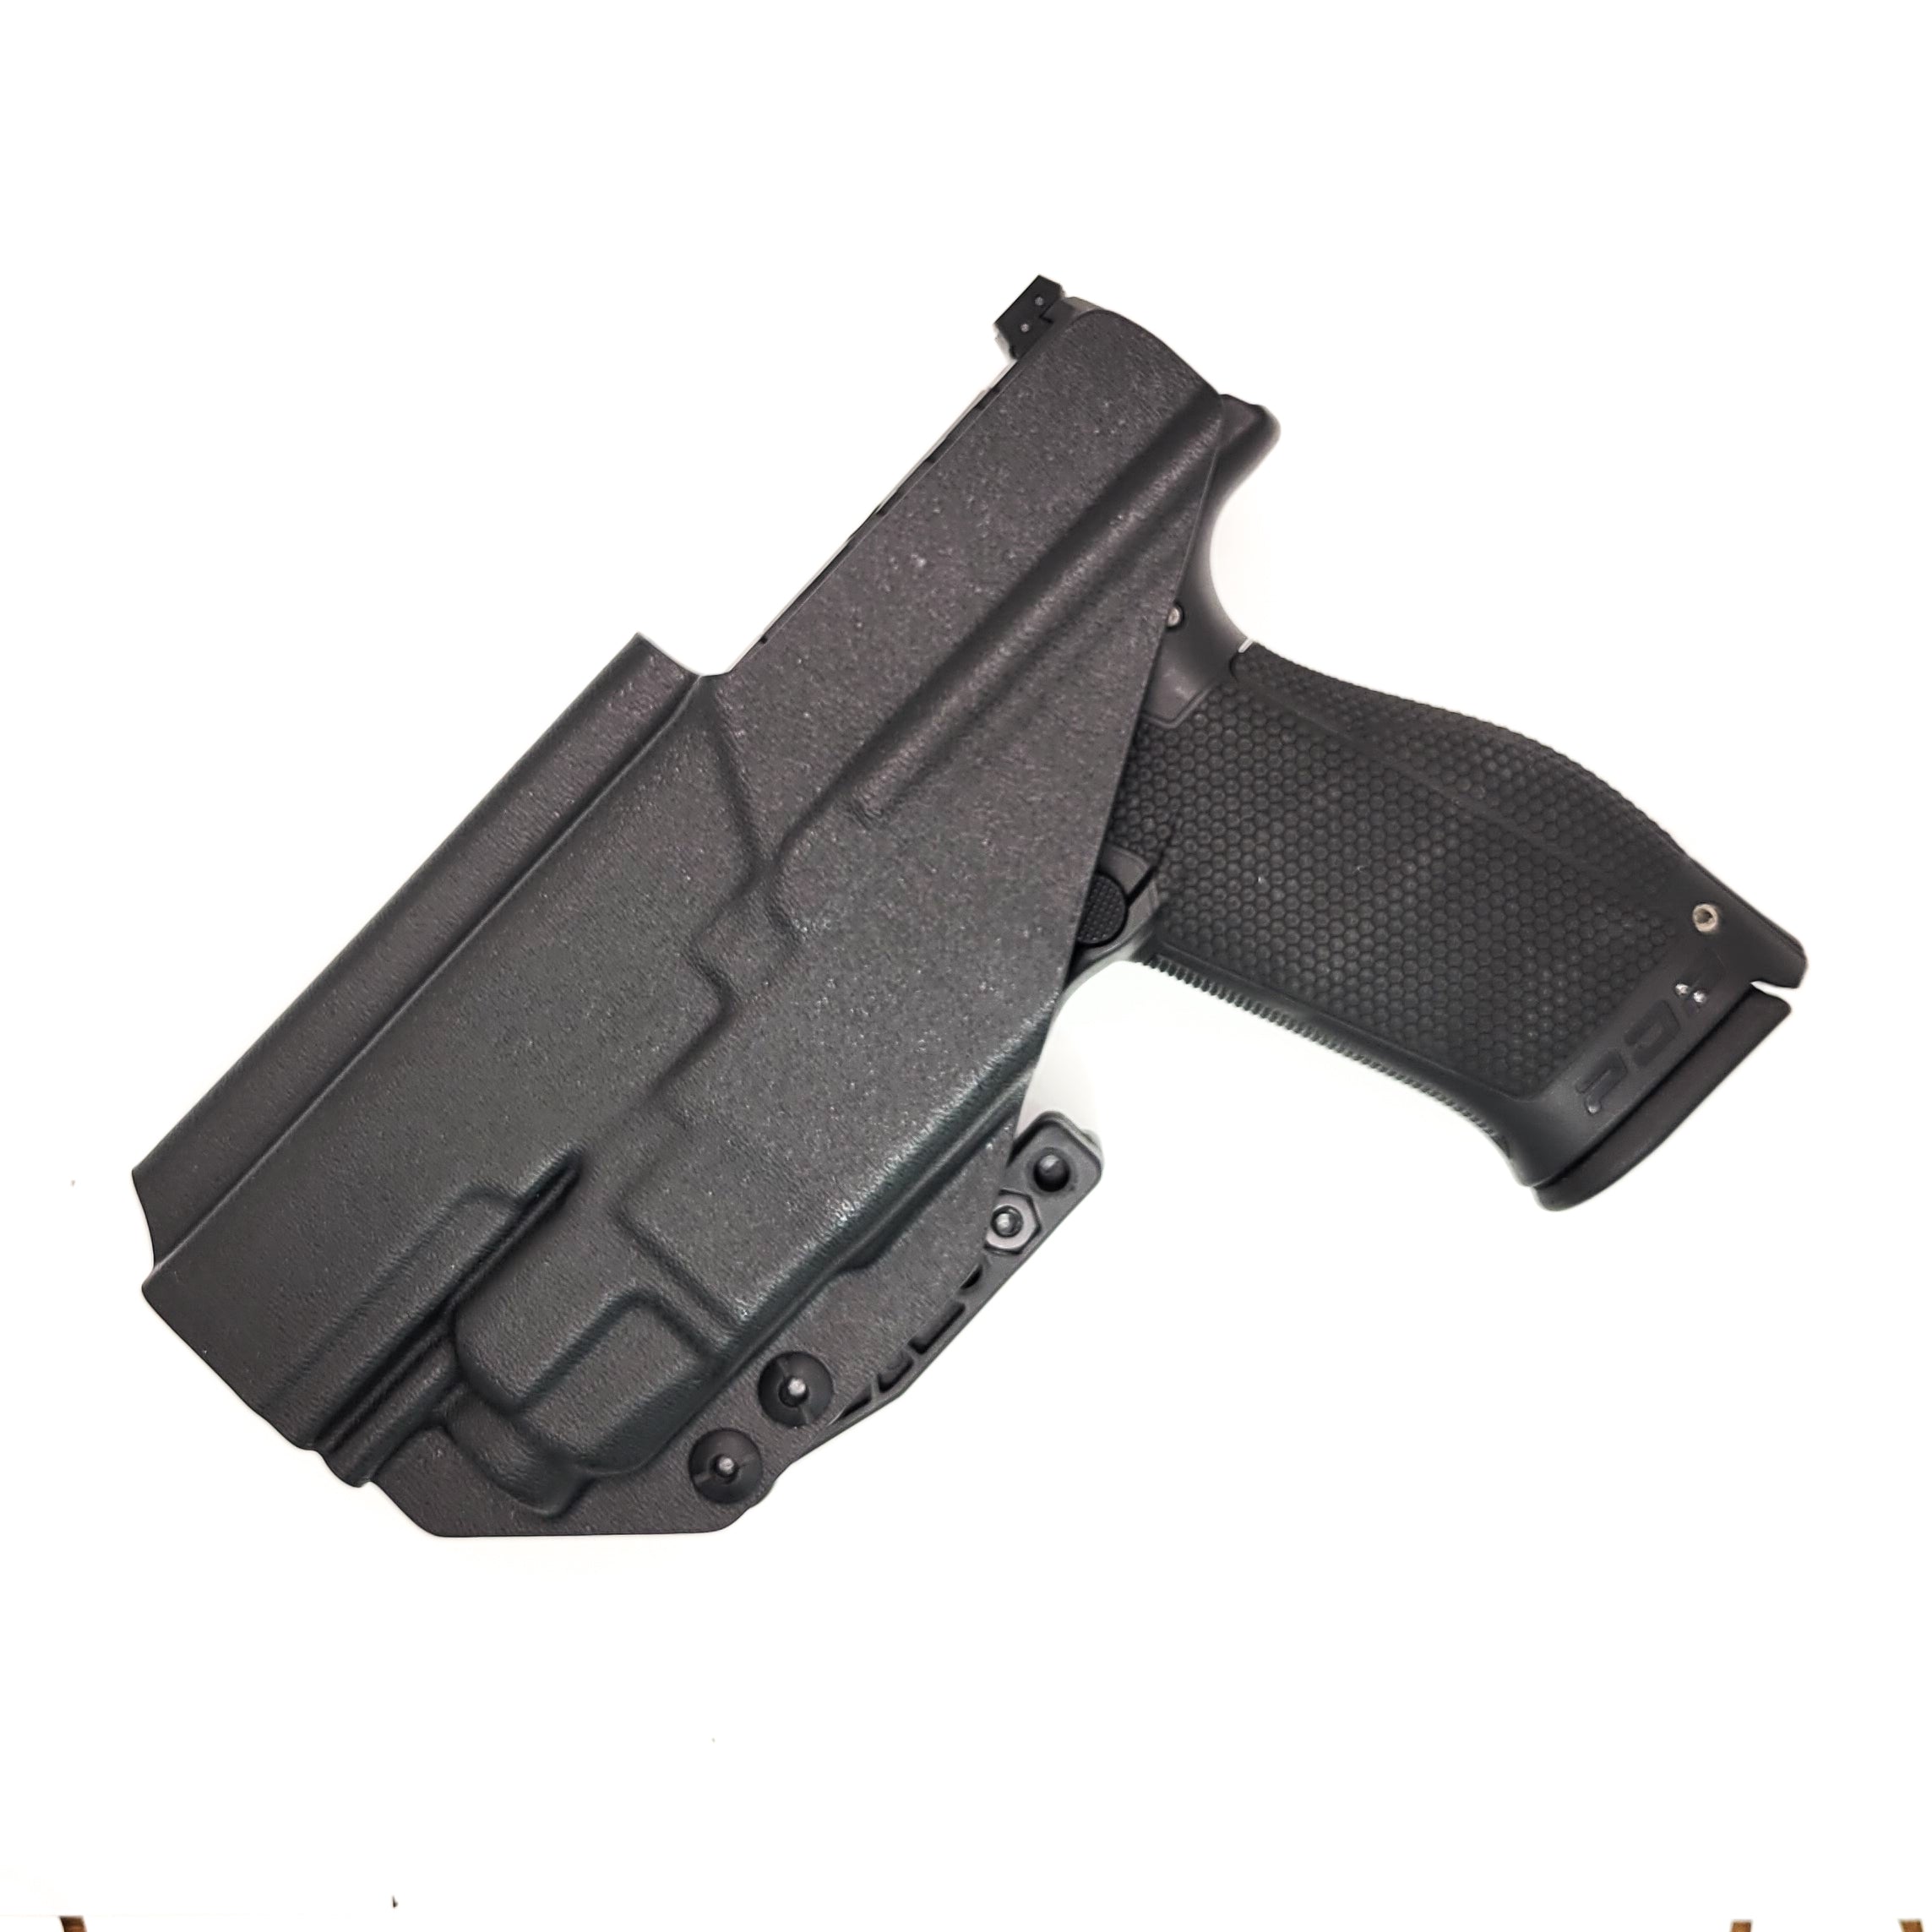 For the best concealed carry Inside Waistband IWB AIWB Holster designed to fit the Walther PDP 4.5" Full-Size pistol with the Streamlight TLR-7A or TLR-7 mounted on the firearm, shop Four Brothers Holsters. Cut for red dot sight, full sweat guard, adjustable retention & open muzzle for threaded barrels & compensators. 